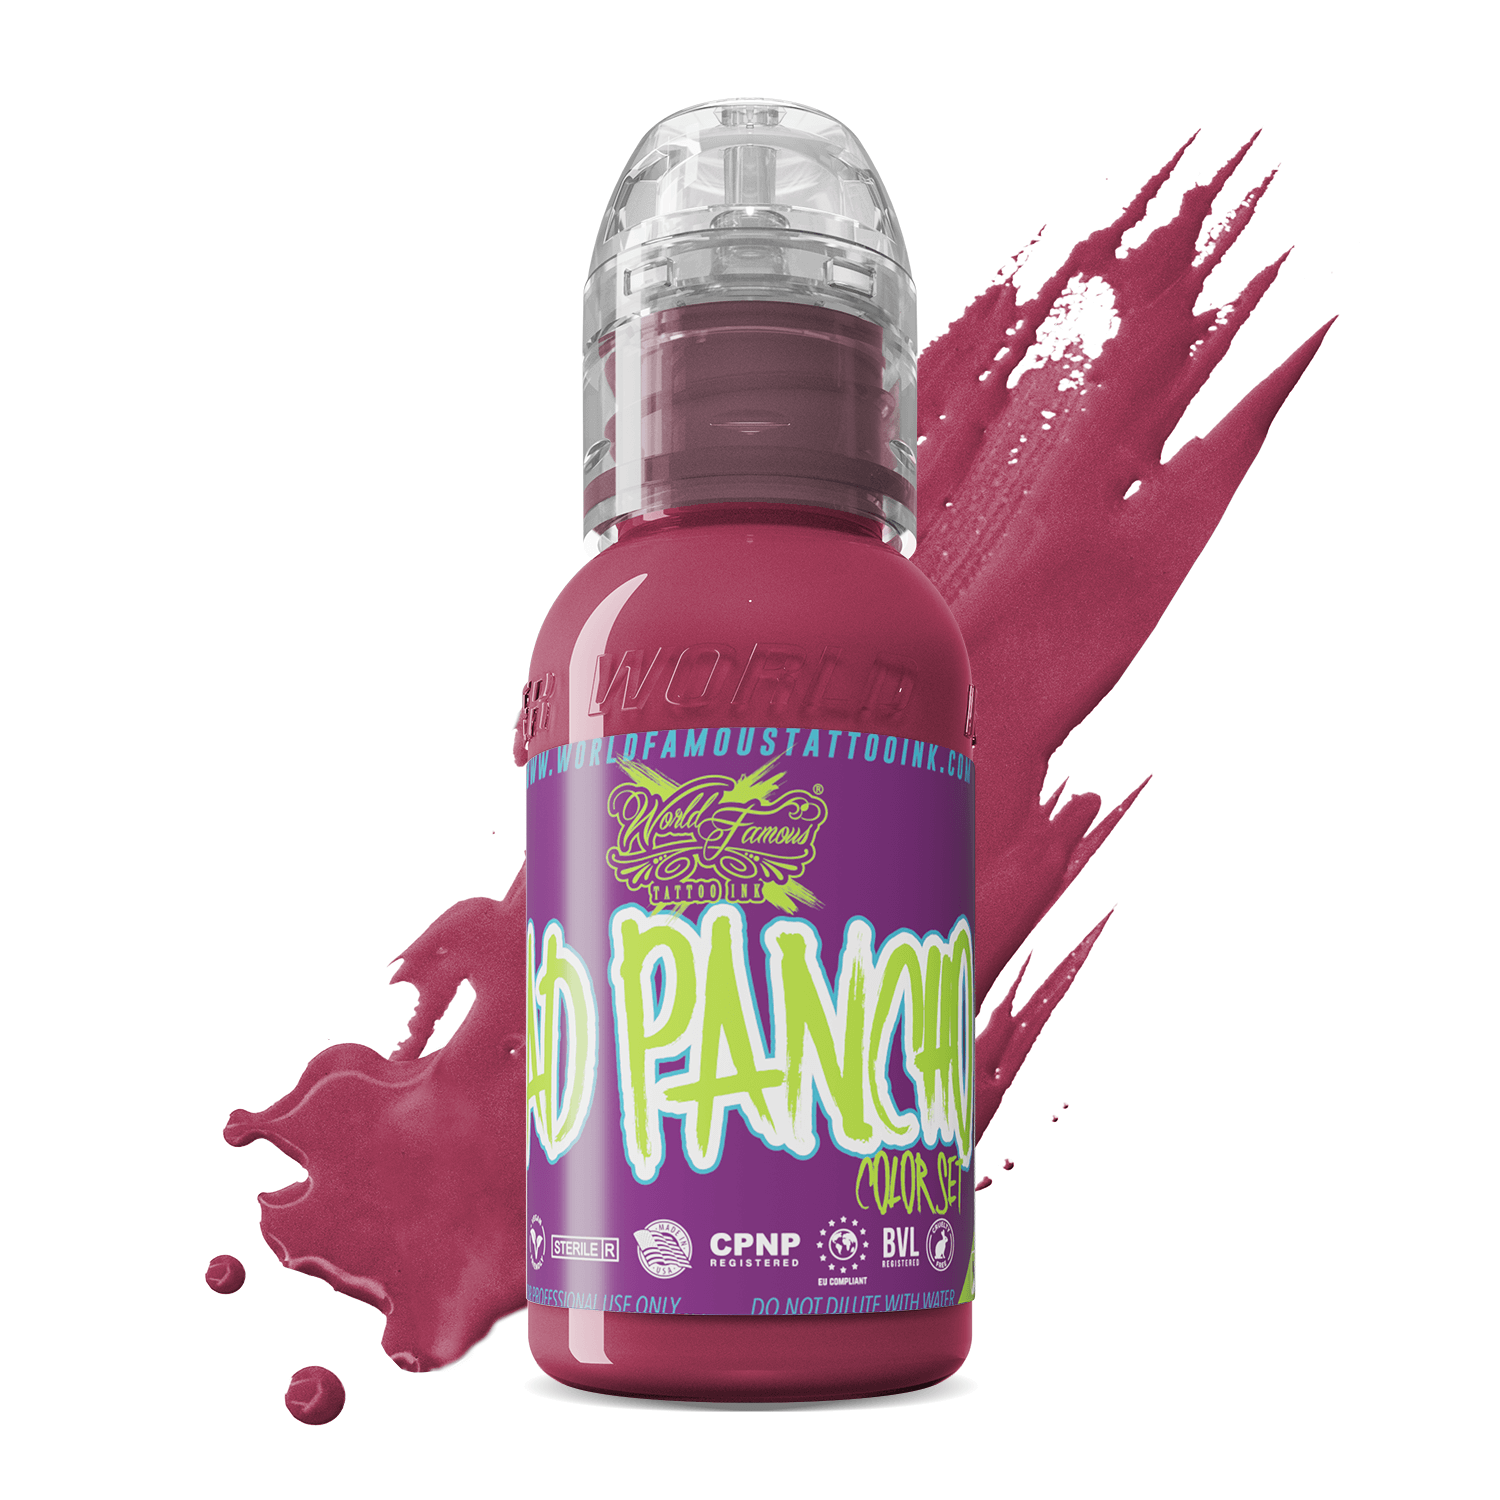 A.D. Pancho Proteam Color - Pink | World Famous Tattoo Ink